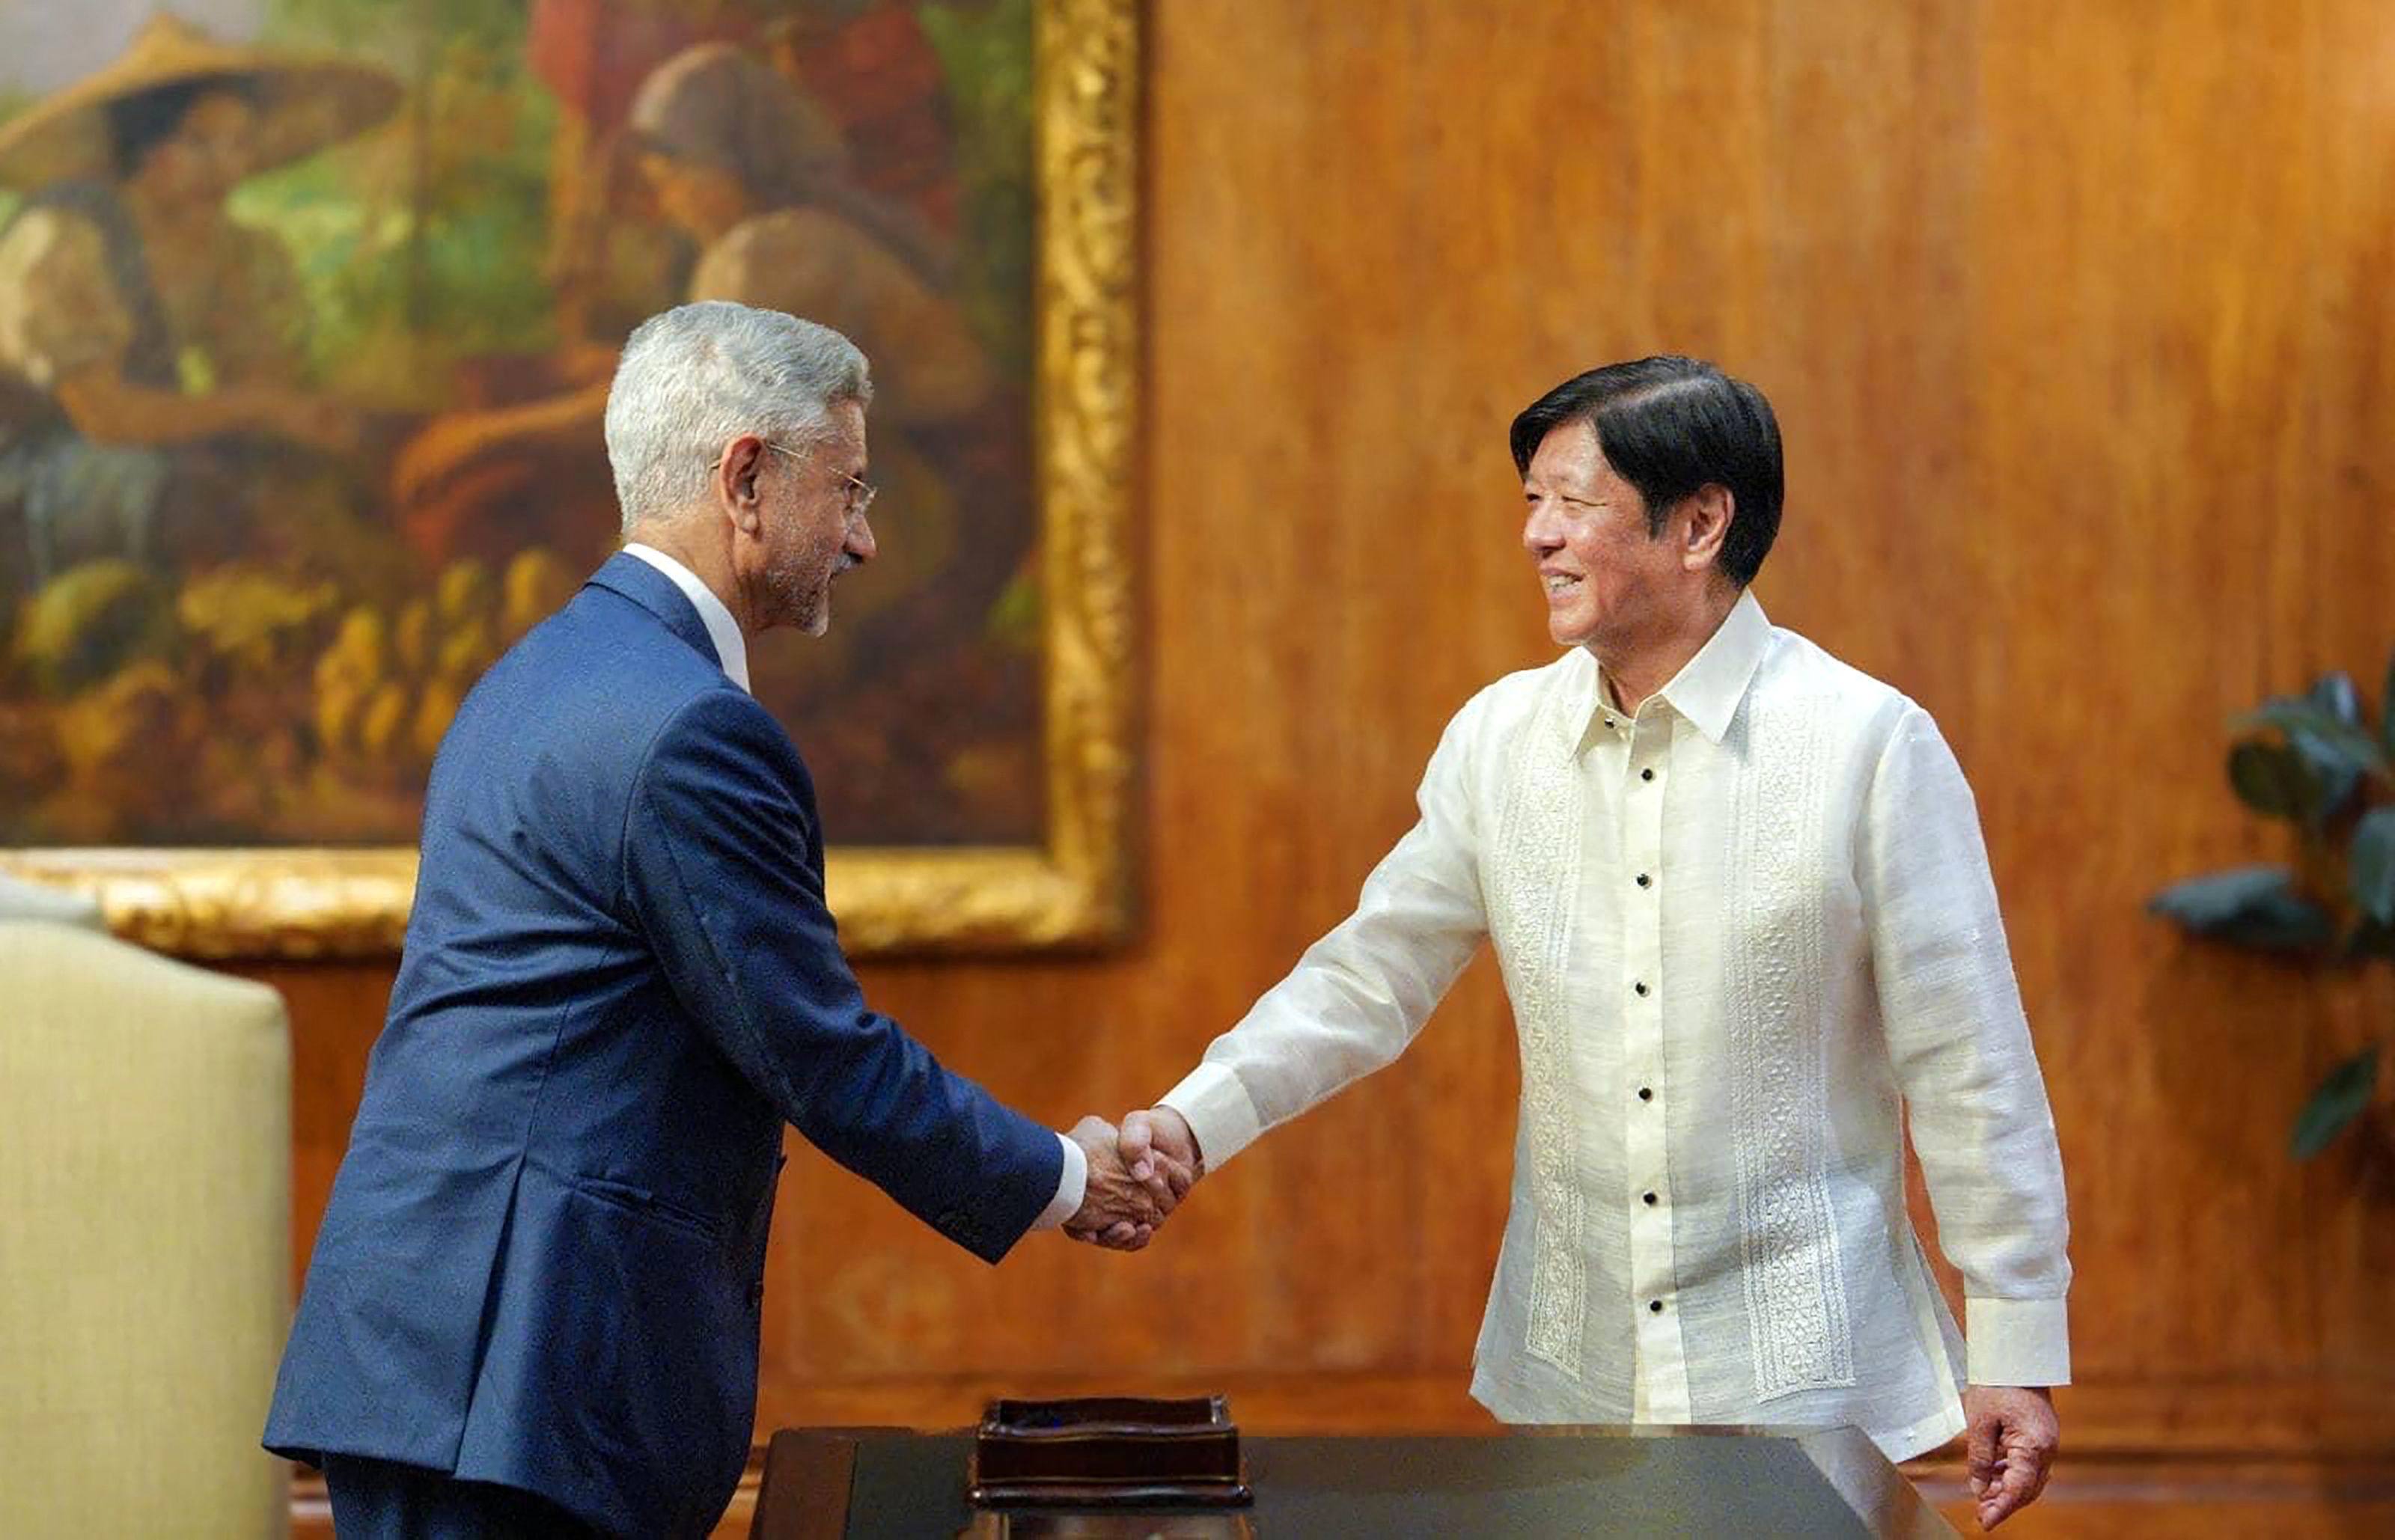 India’s External Affairs Minister S. Jaishankar meets with Philippine President Ferdinand Marcos Jr during his visit to Manila on March 26. Photo: Presidential Communications Office via AFP